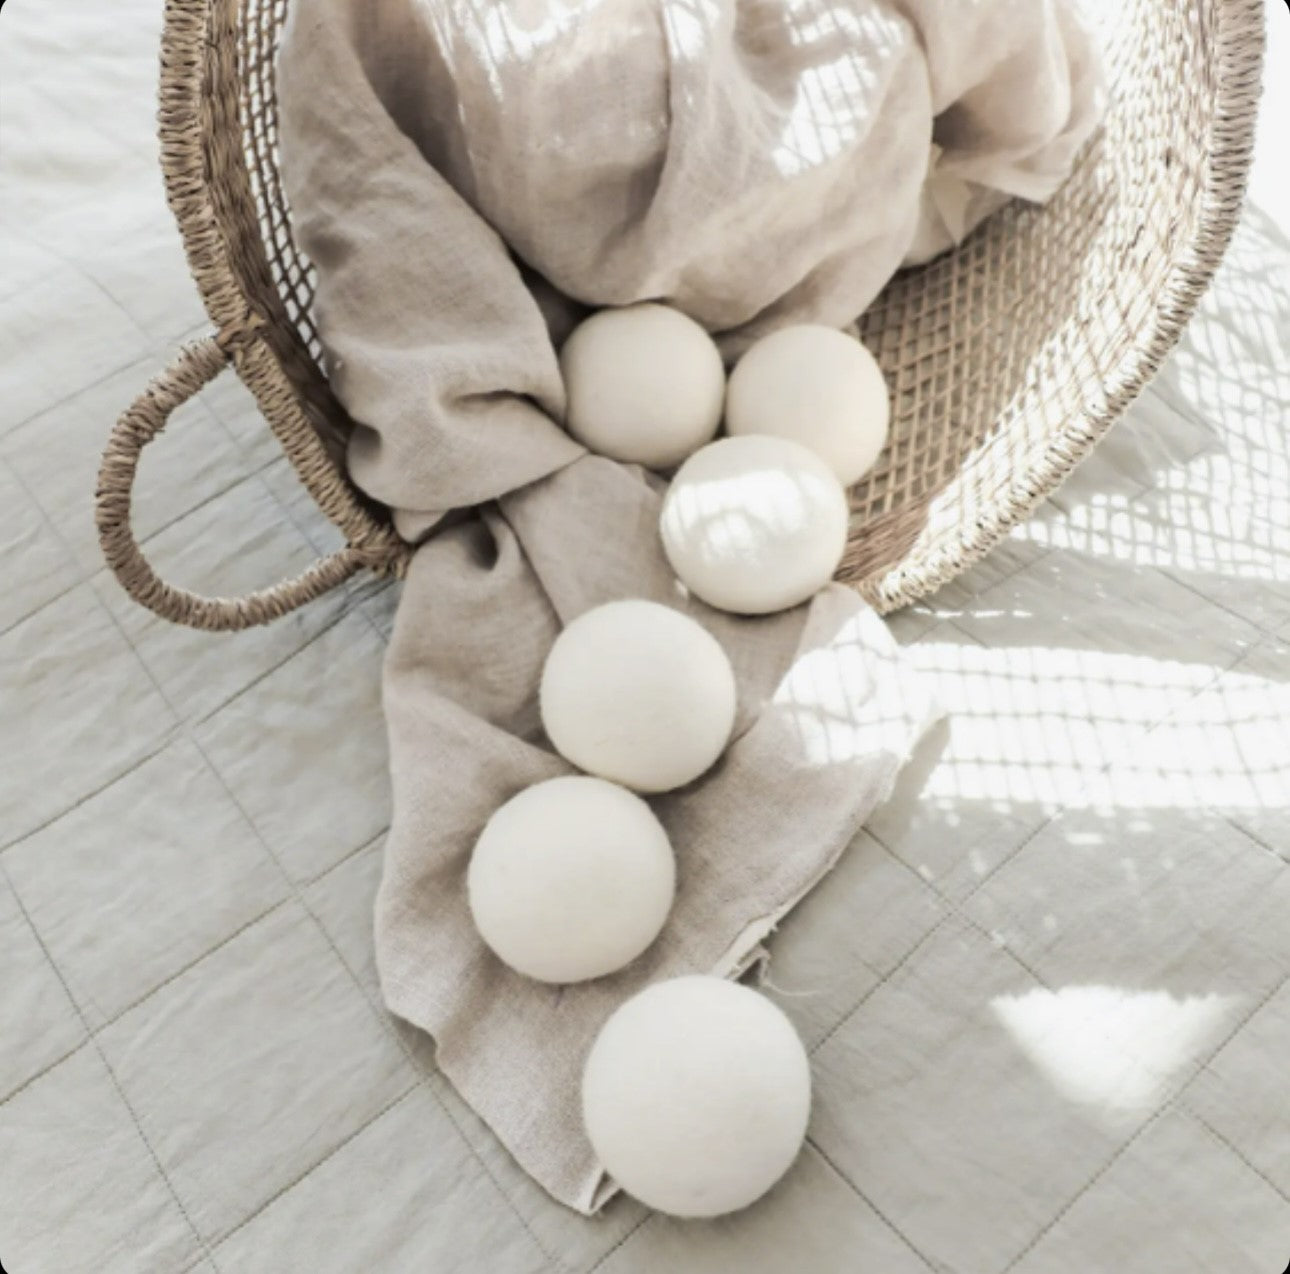 A collection of white decorative spheres elegantly spilling out of a woven basket onto a textured neutral fabric on the floor, bathed in soft, natural light.